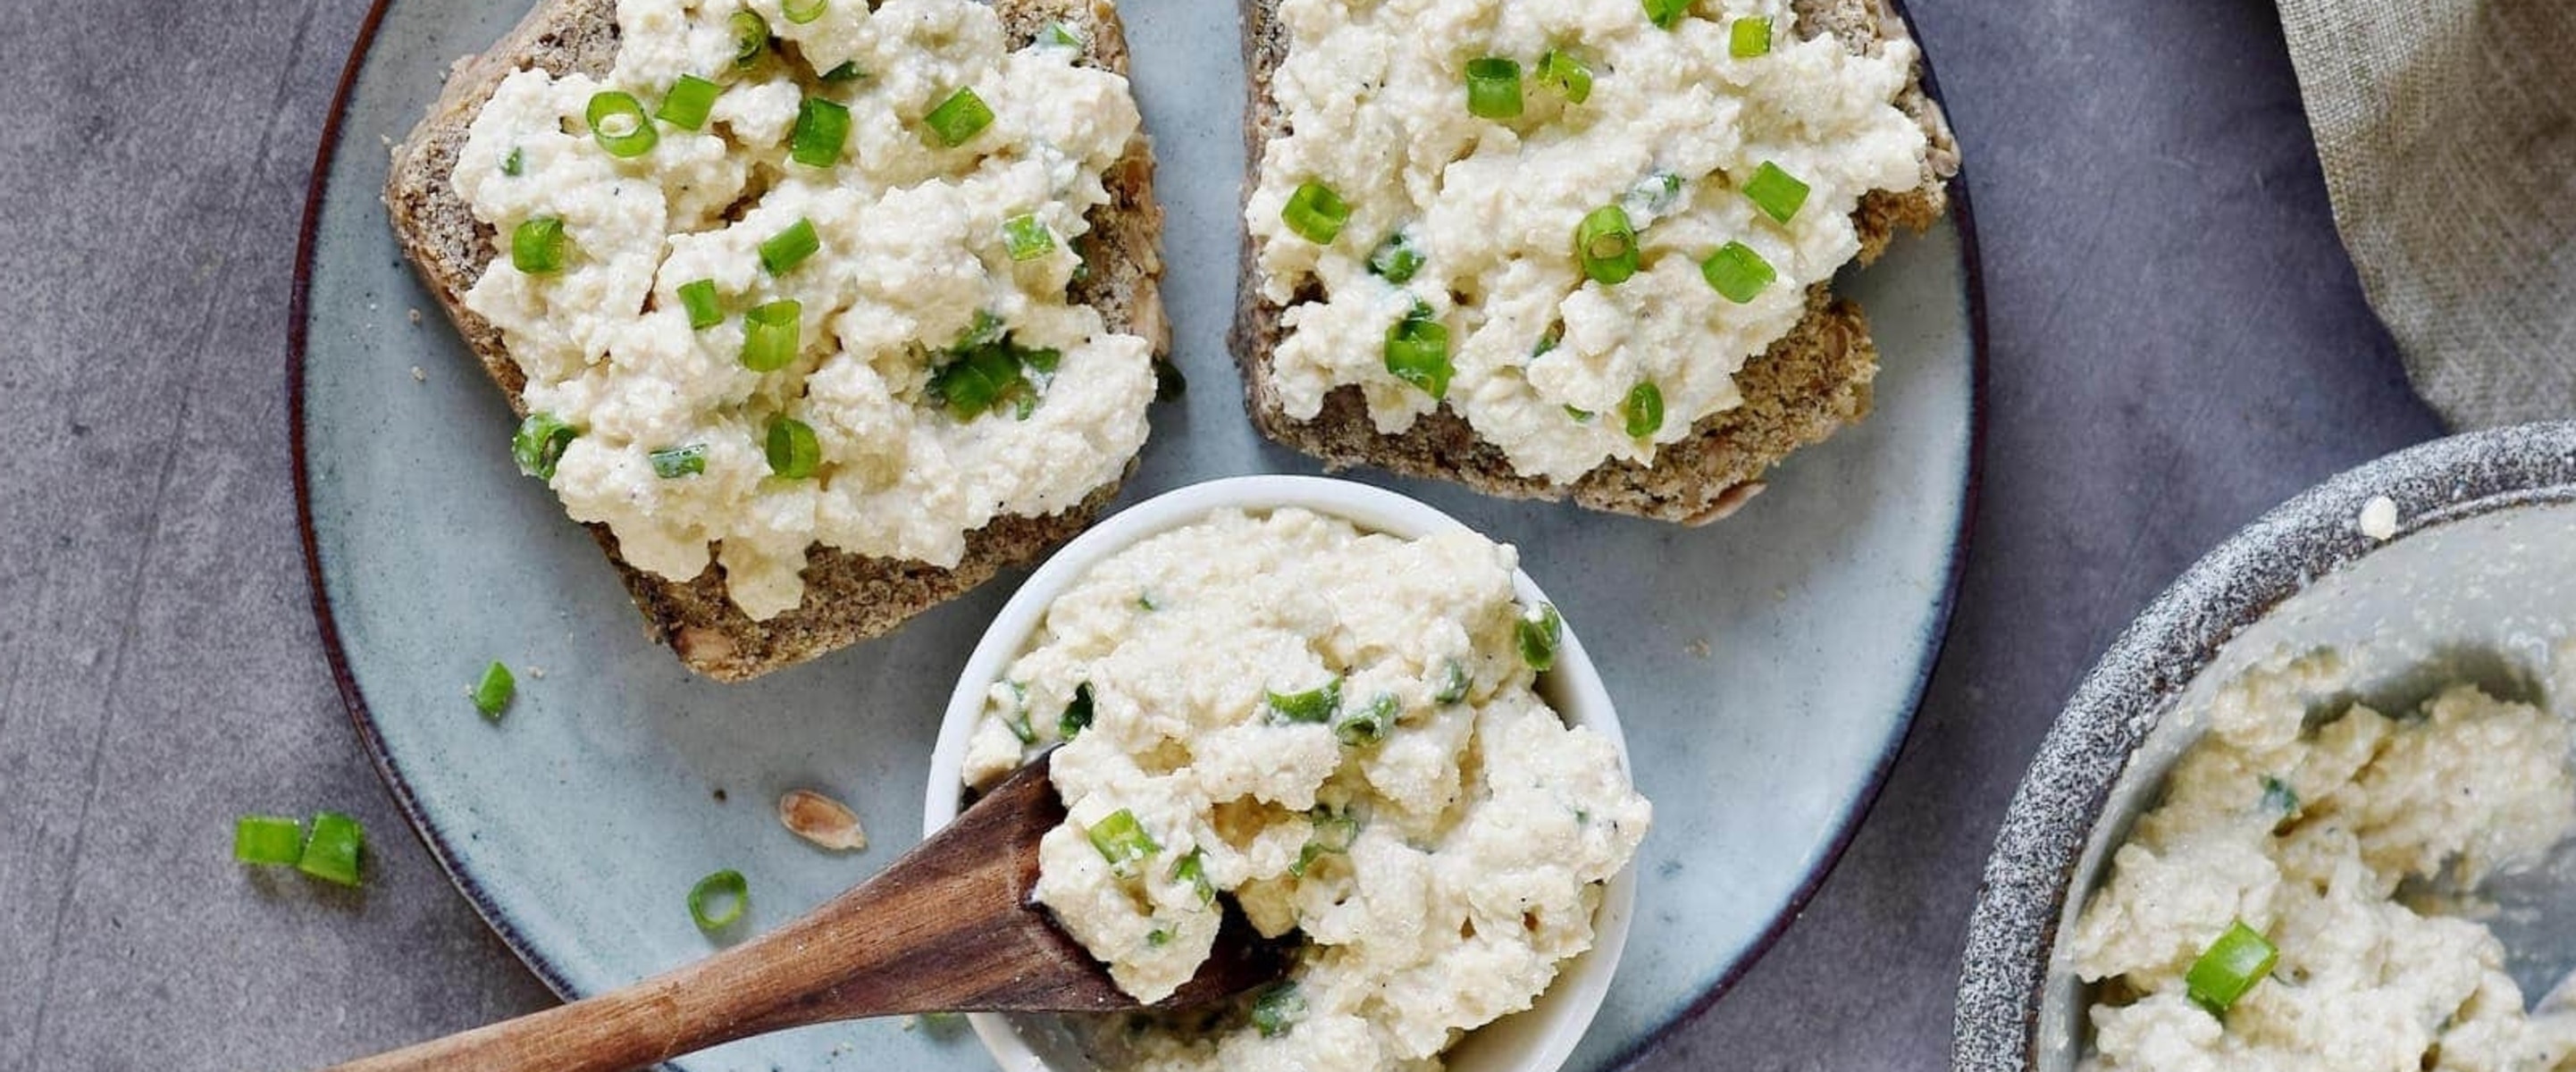 How to Make Vegan Cottage Cheese (Spoiler: It Involves a Lot of Tofu)&nbsp;